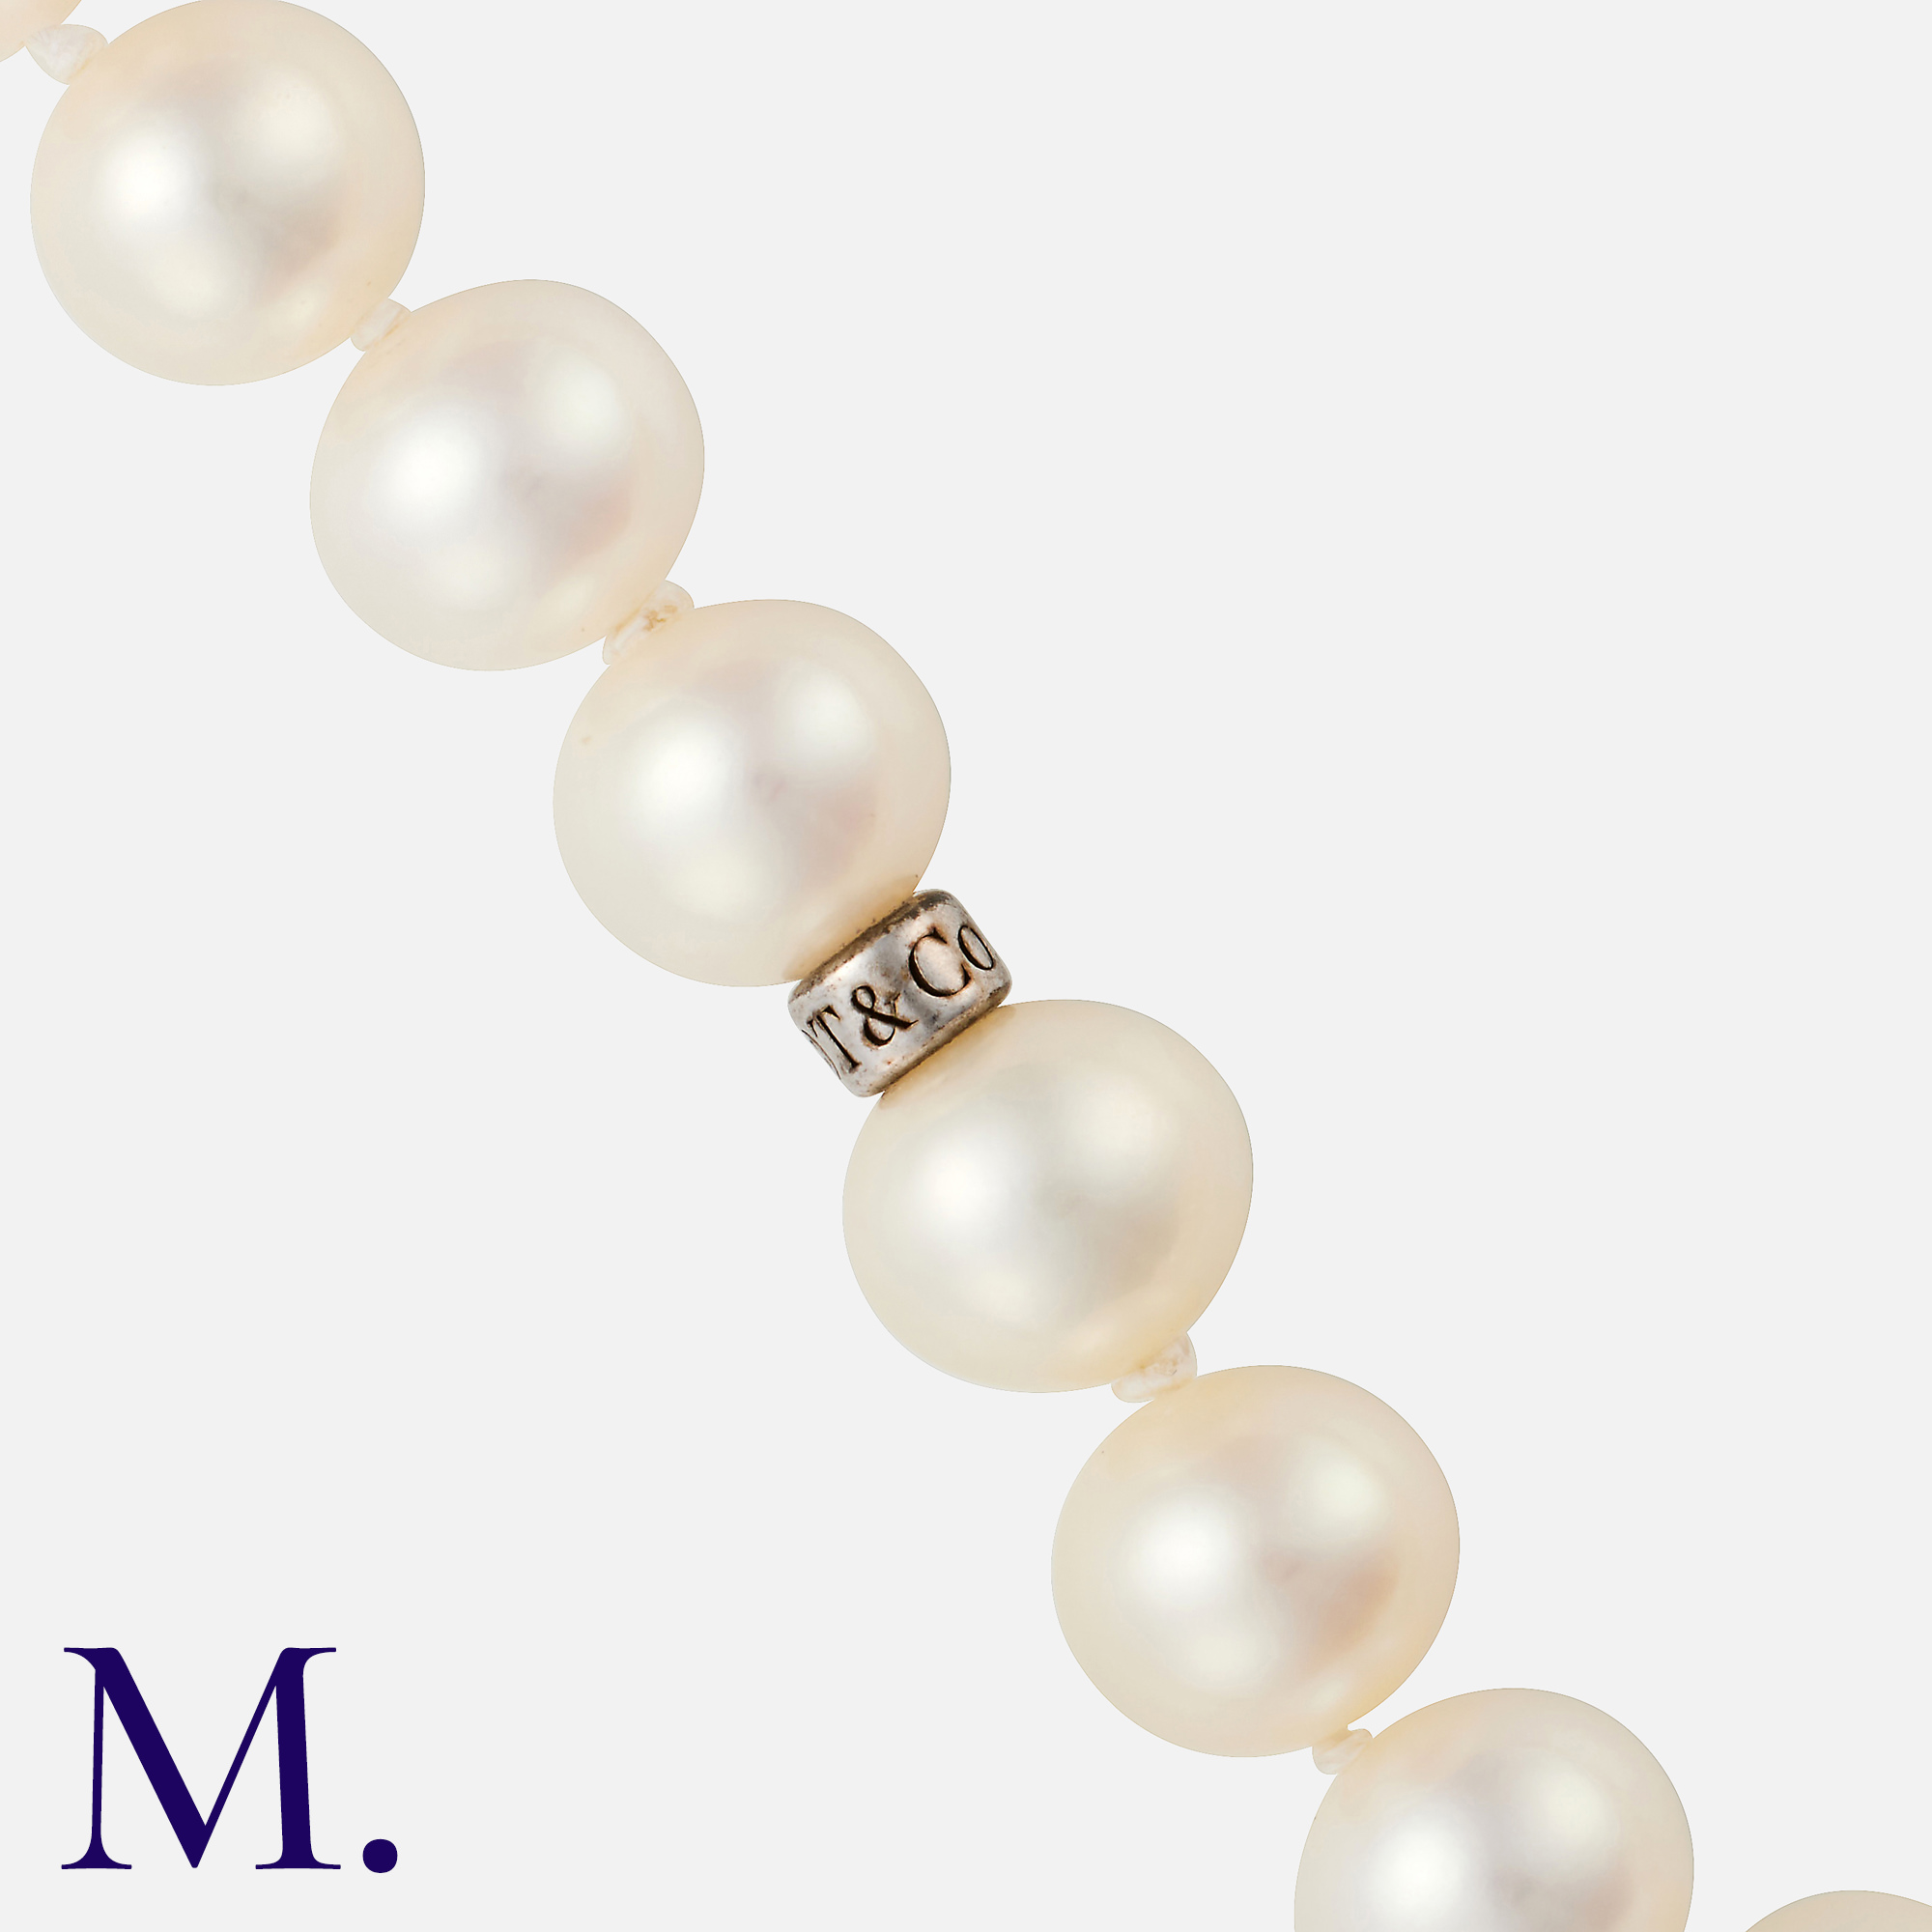 TIFFANY & CO. A Long Pearl Necklace with a silver tag engraved T&Co., set with 8mm pearls. Size: - Image 2 of 2